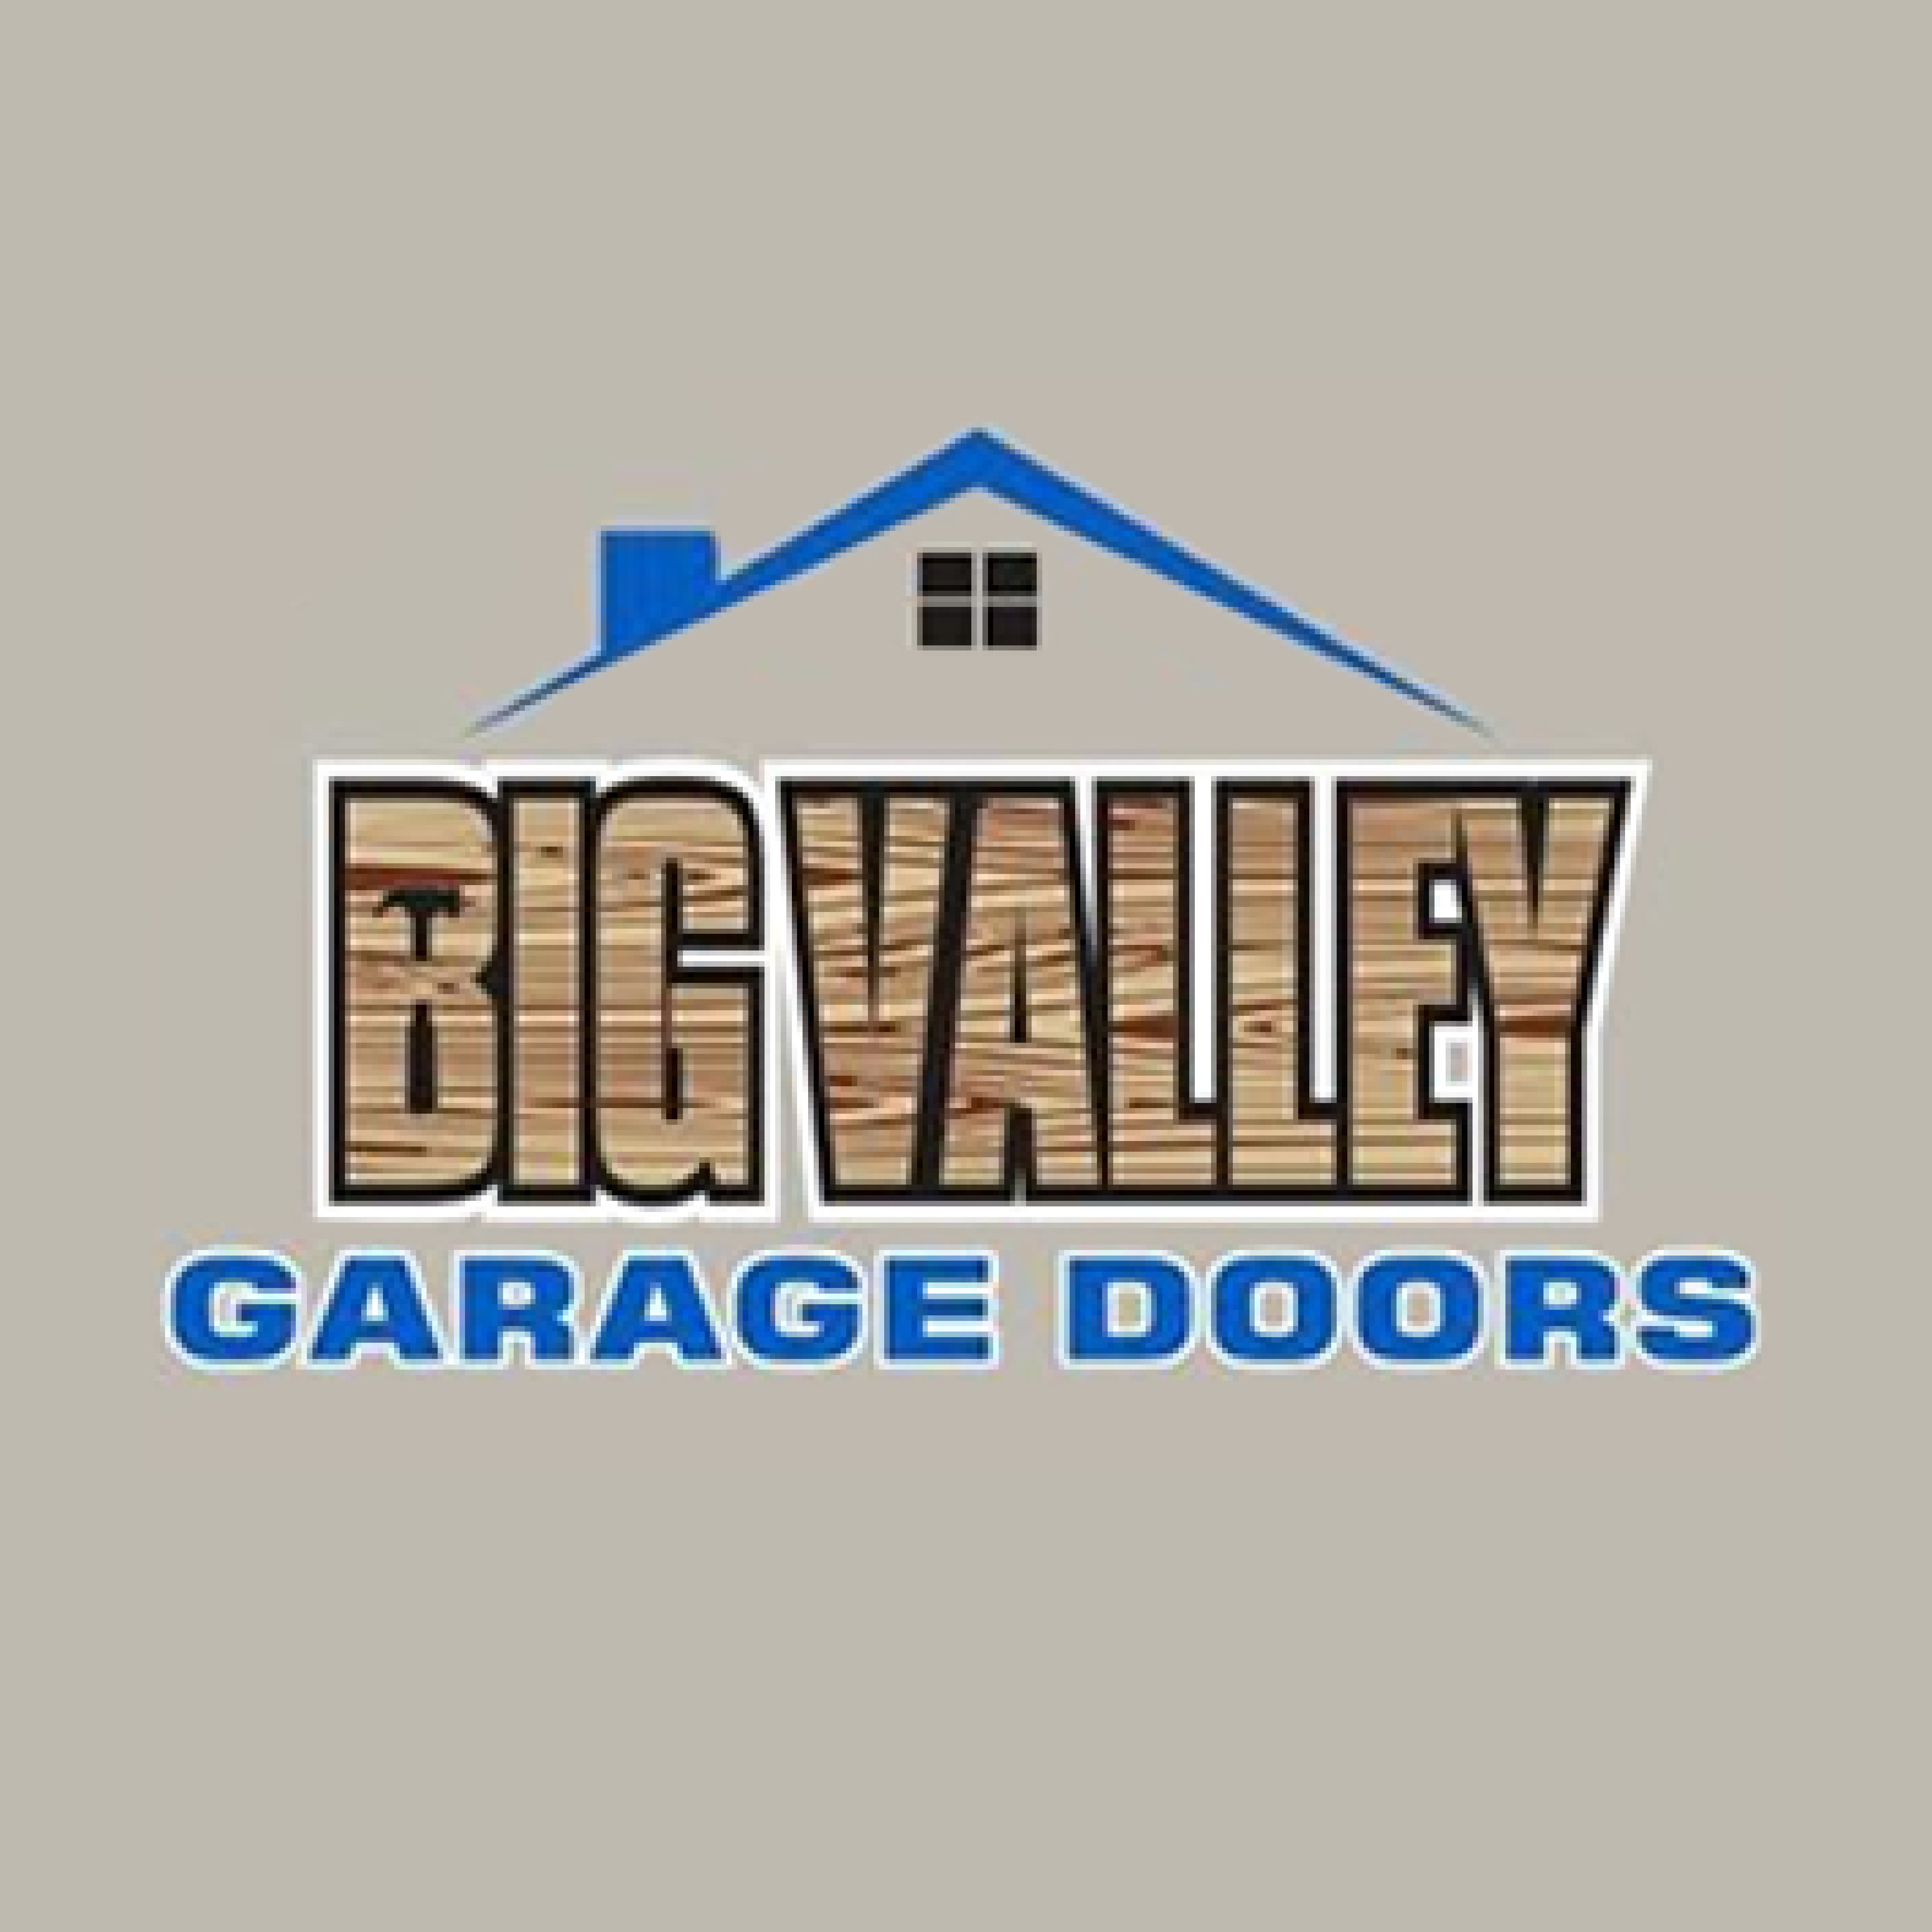 Big Valley Garage Doors, Inc. is a family-owned business that has been replacing and repairing garage doors since 2005. Call us at (559) 240-6050!